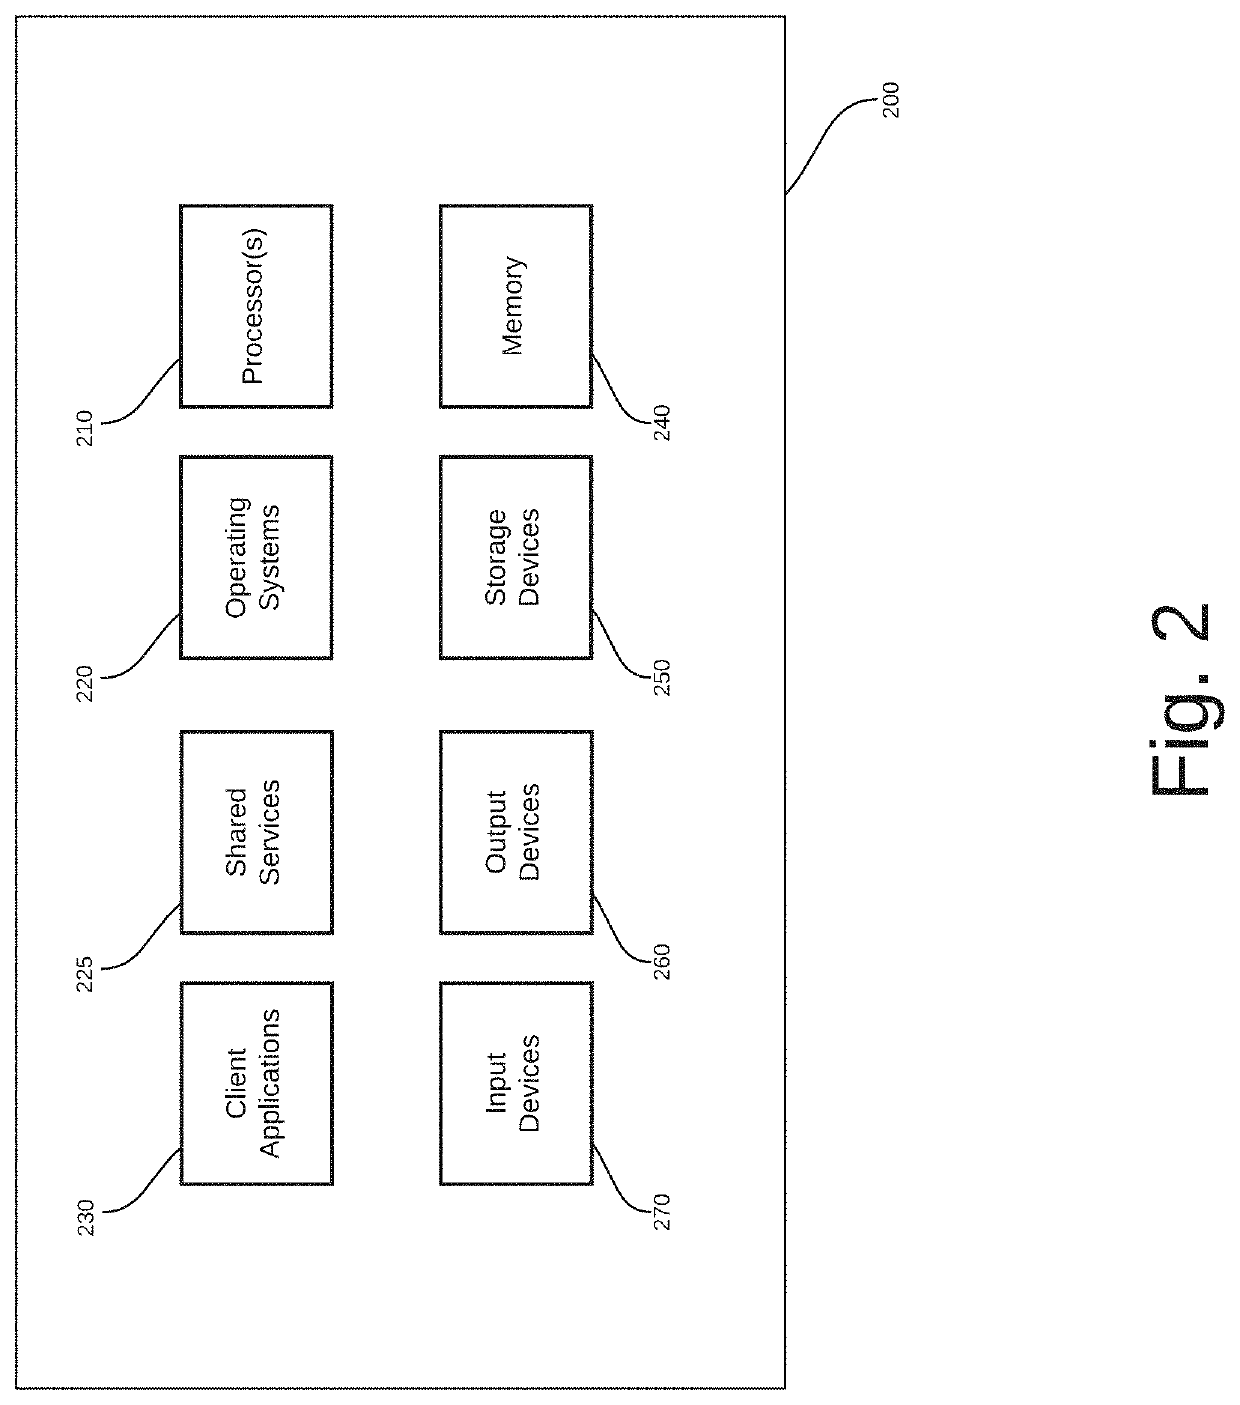 System and method for off-chain cryptographic transaction verification